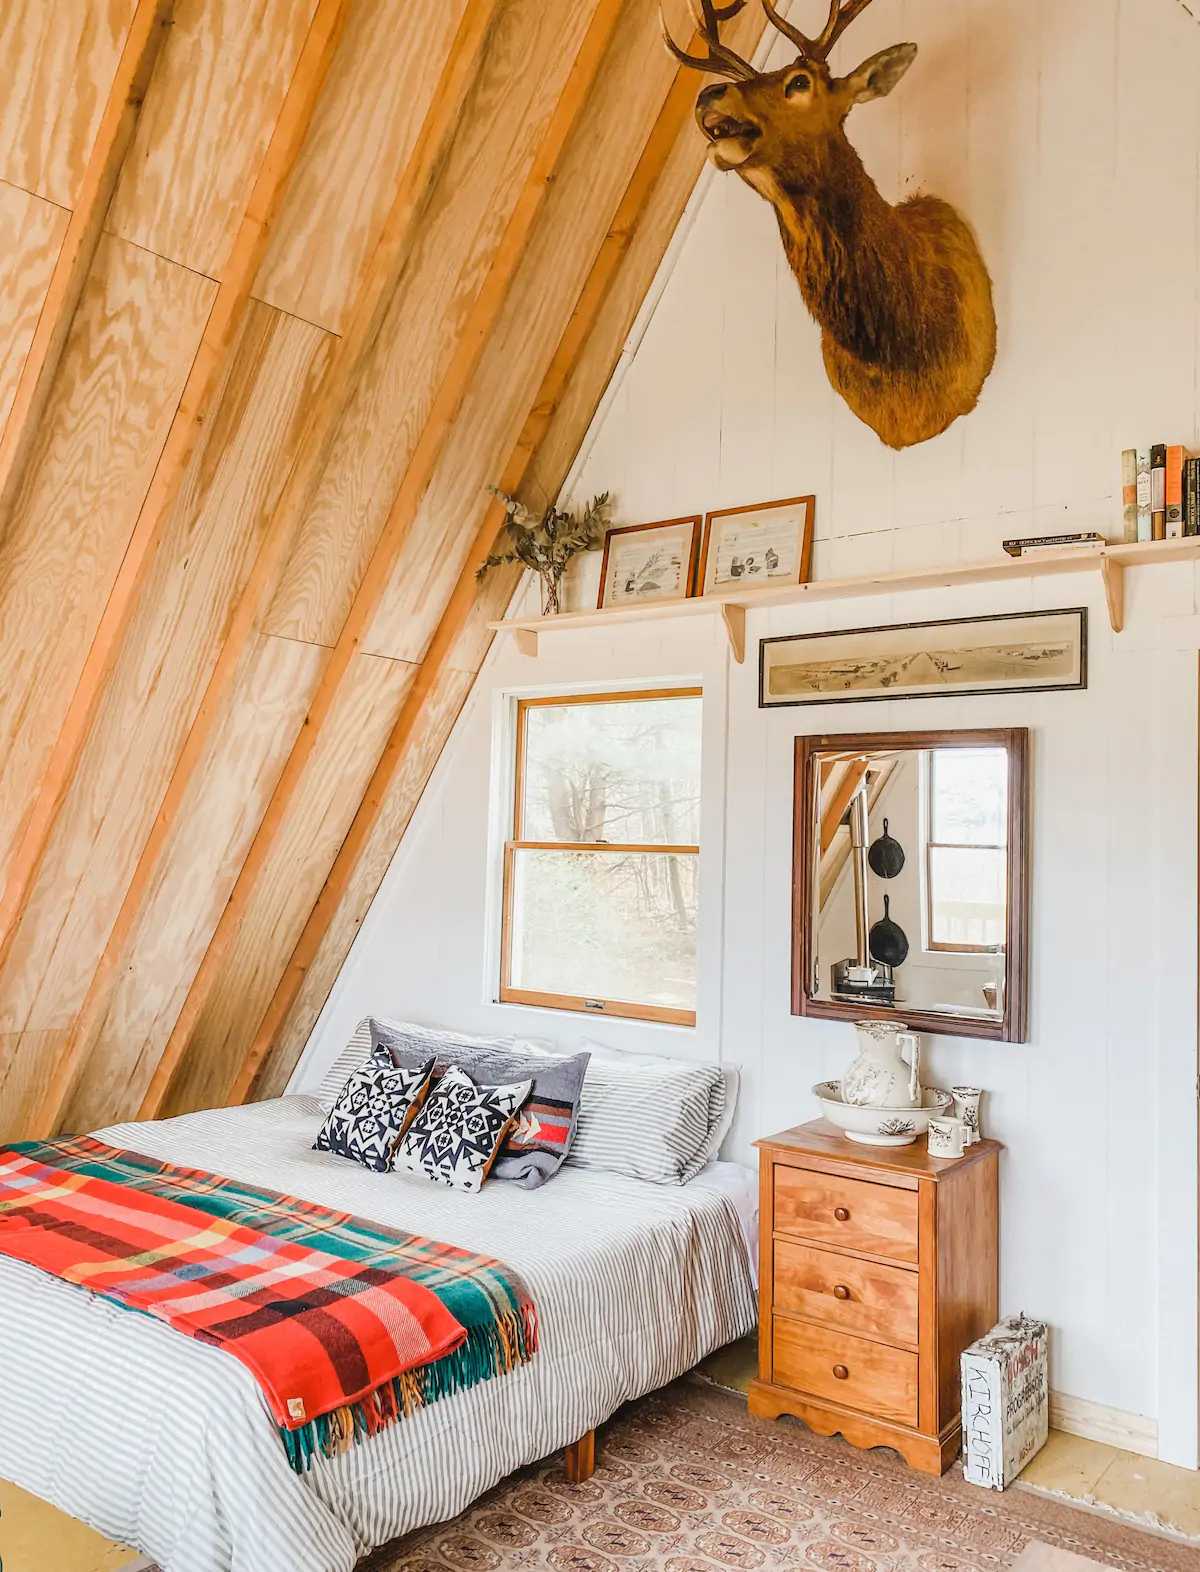 Bedroom with a slanted wooden ceiling. The bed has a red and green plaid blanket on it and a window is above the bed frame.